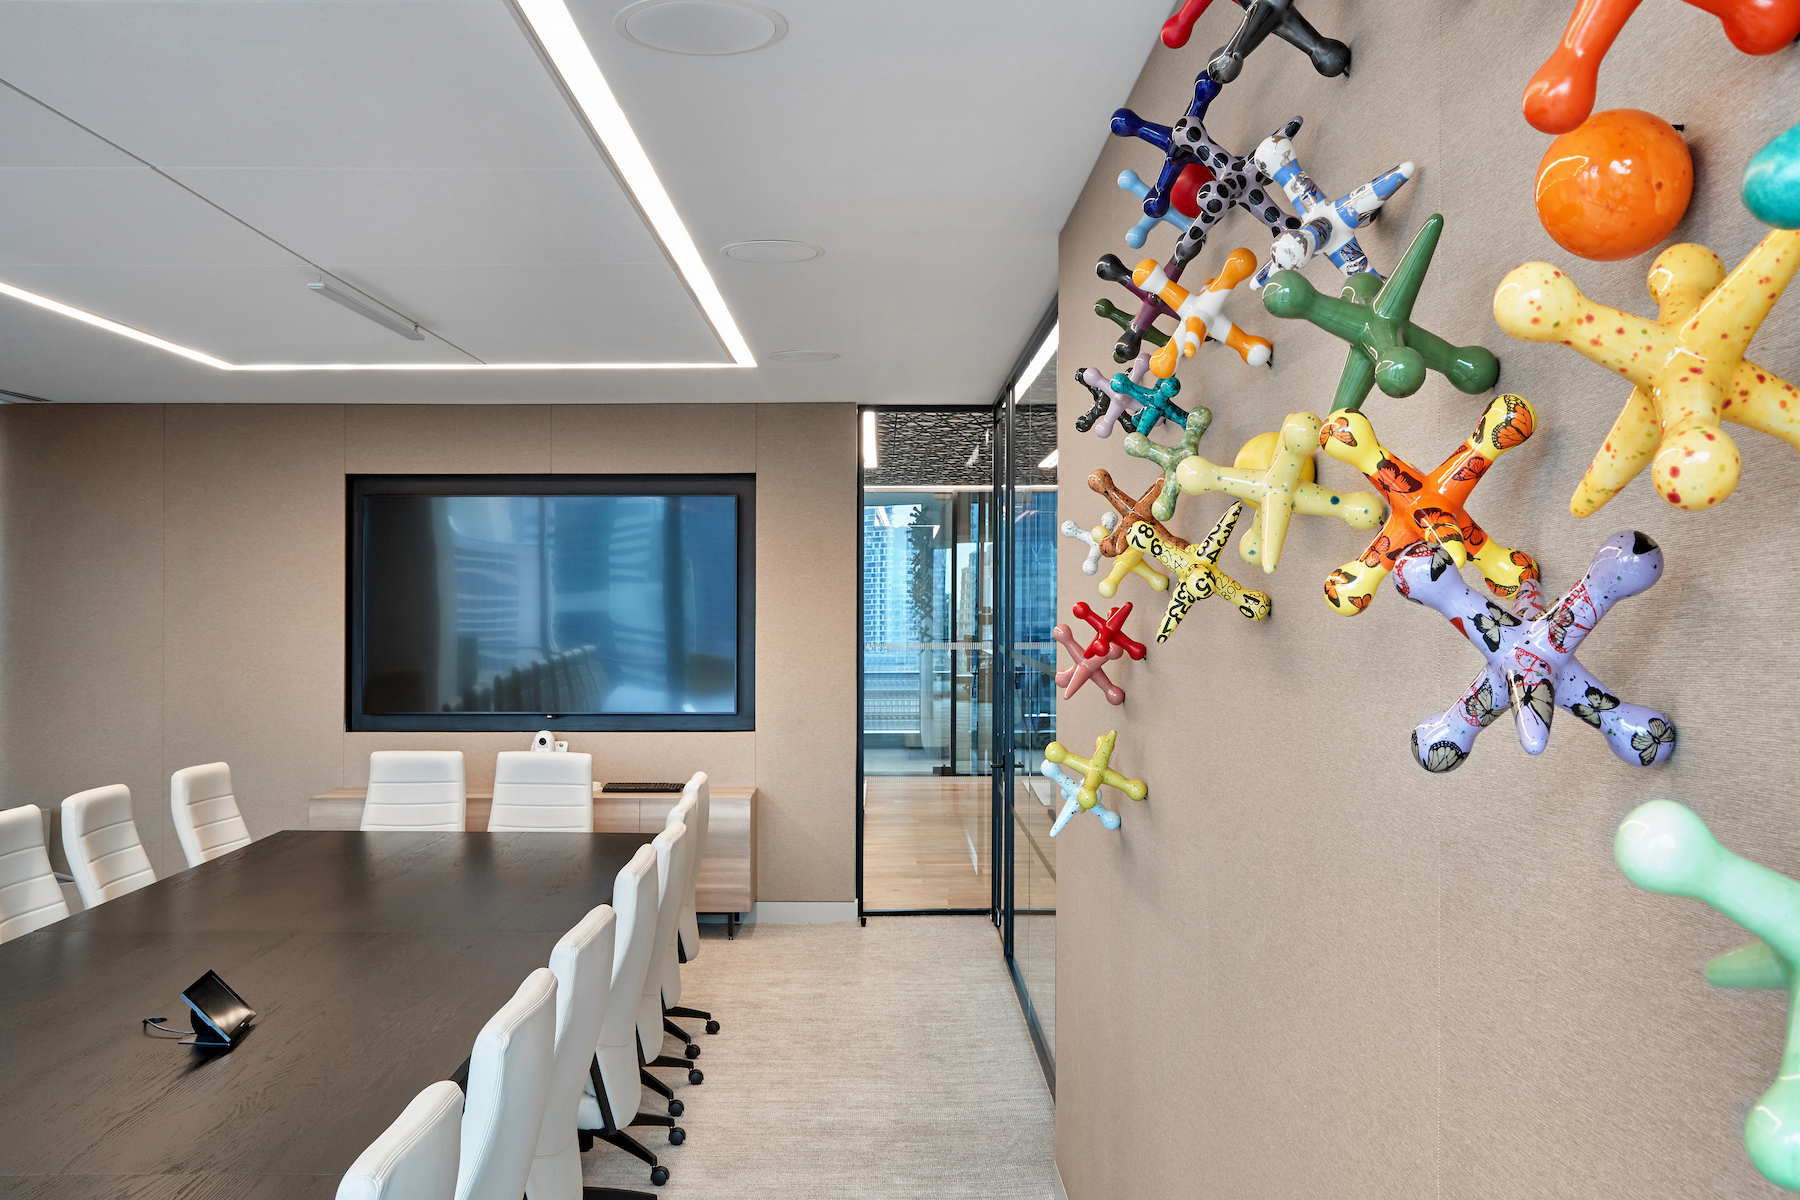 A playful design for a conference room. 